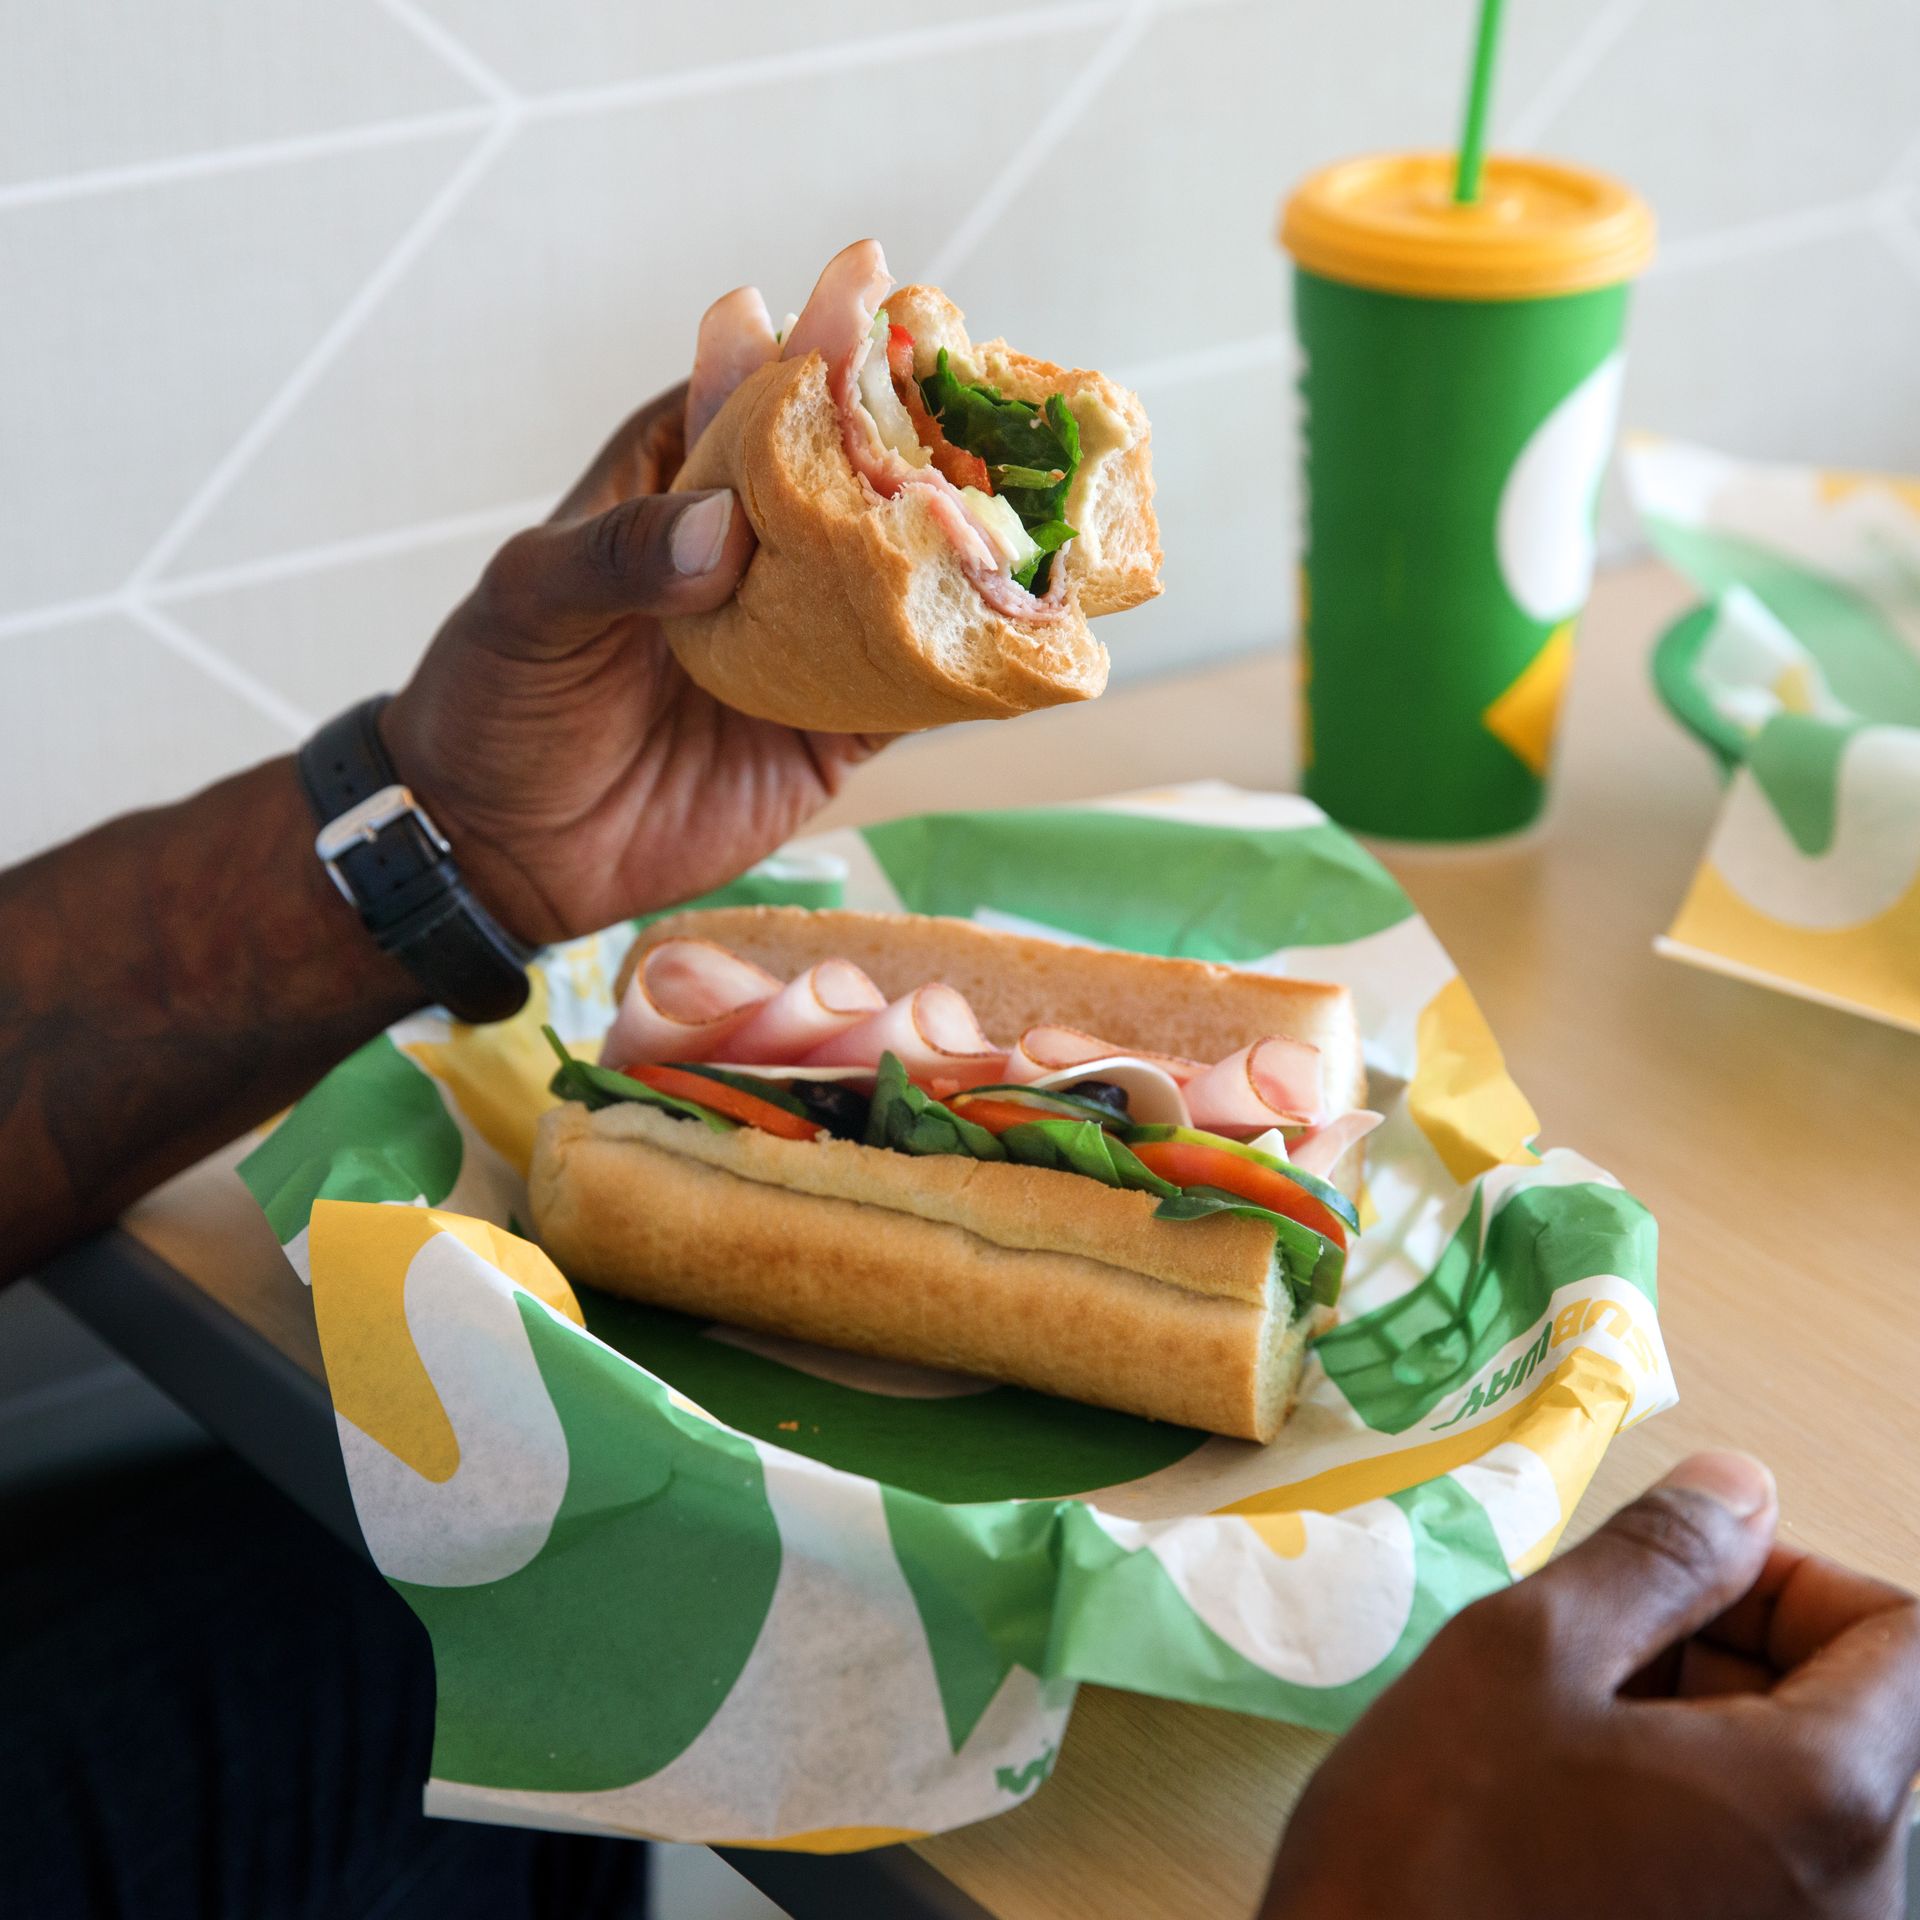 Subway discounts and coupons - Columbus on the Cheap